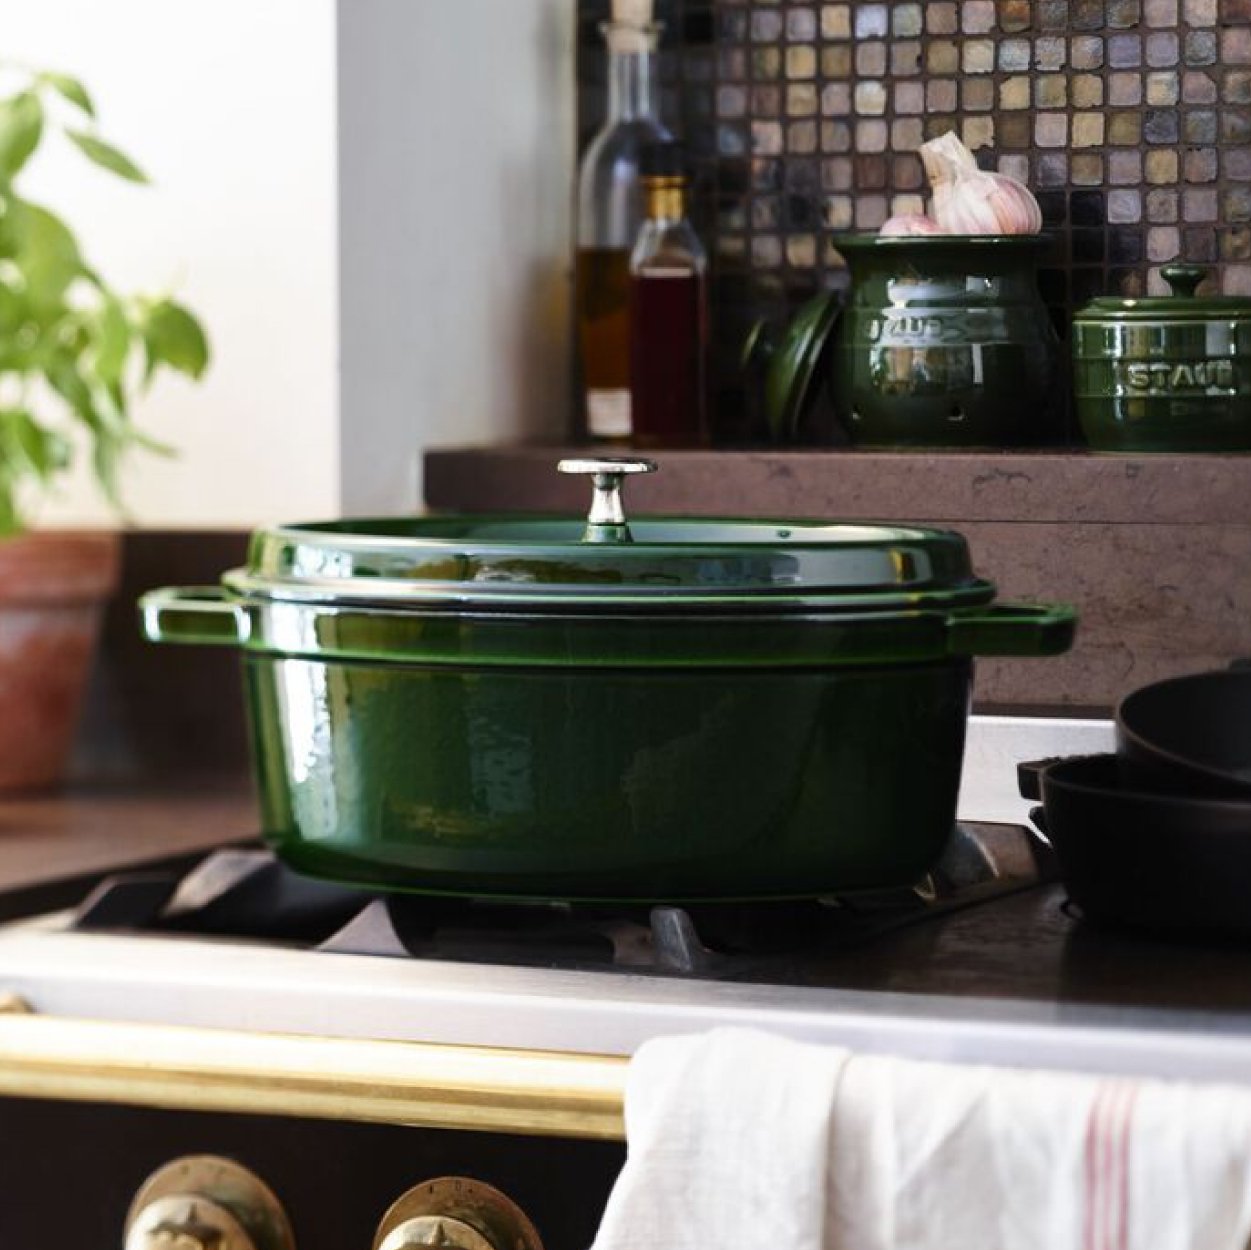 https://www.zwilling.com/on/demandware.static/-/Sites-zwilling-us-Library/default/dwfdc2656c/images/product-content/masonry-content/staub/cast-iron/cocotte/OvalCocottes_Mason_Comp_600-600_OvalCocotte_1.jpg